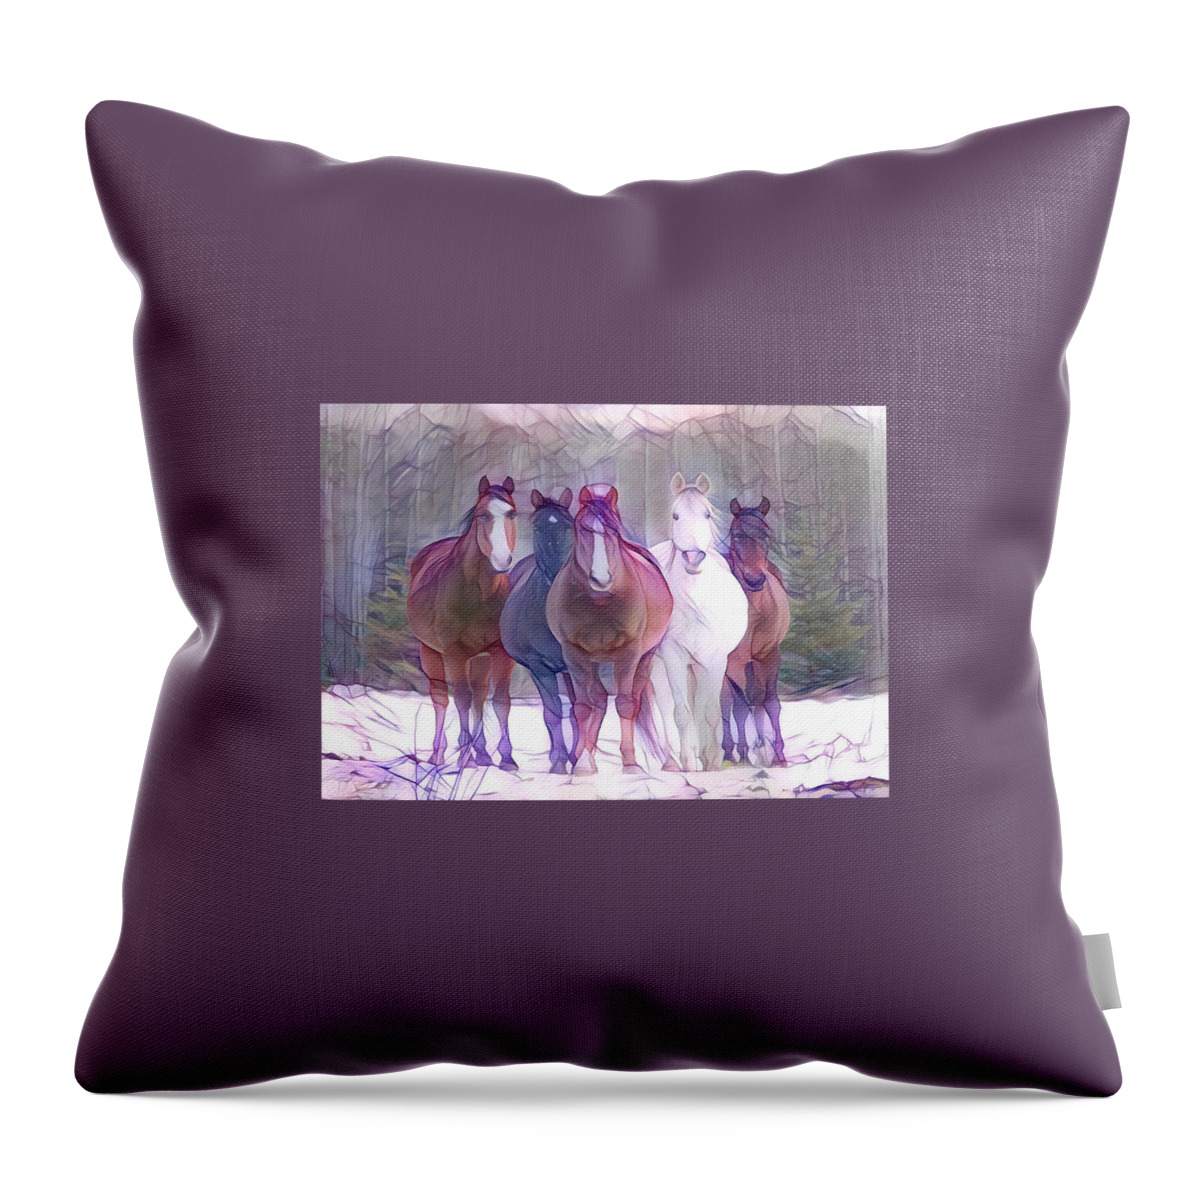 Horses Throw Pillow featuring the digital art Oh Hello 1 by Listen To Your Horse